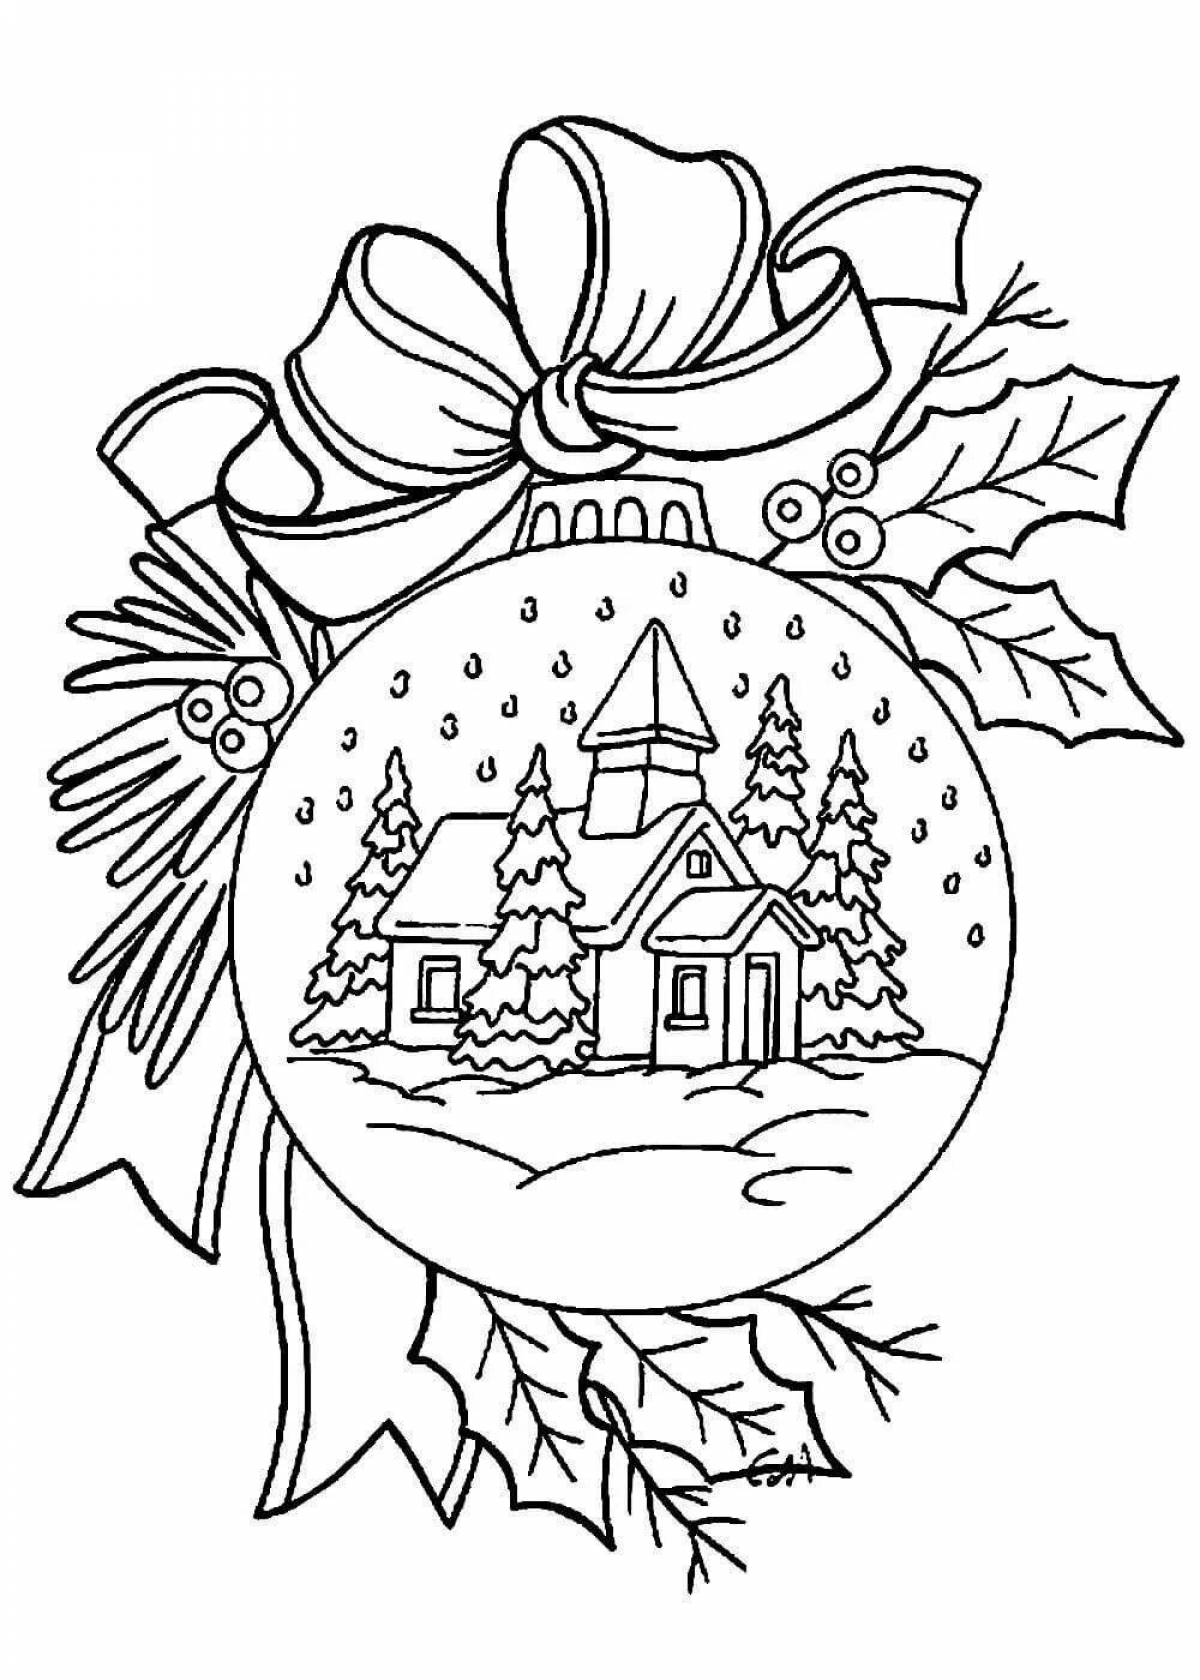 Great coloring card merry christmas and new year